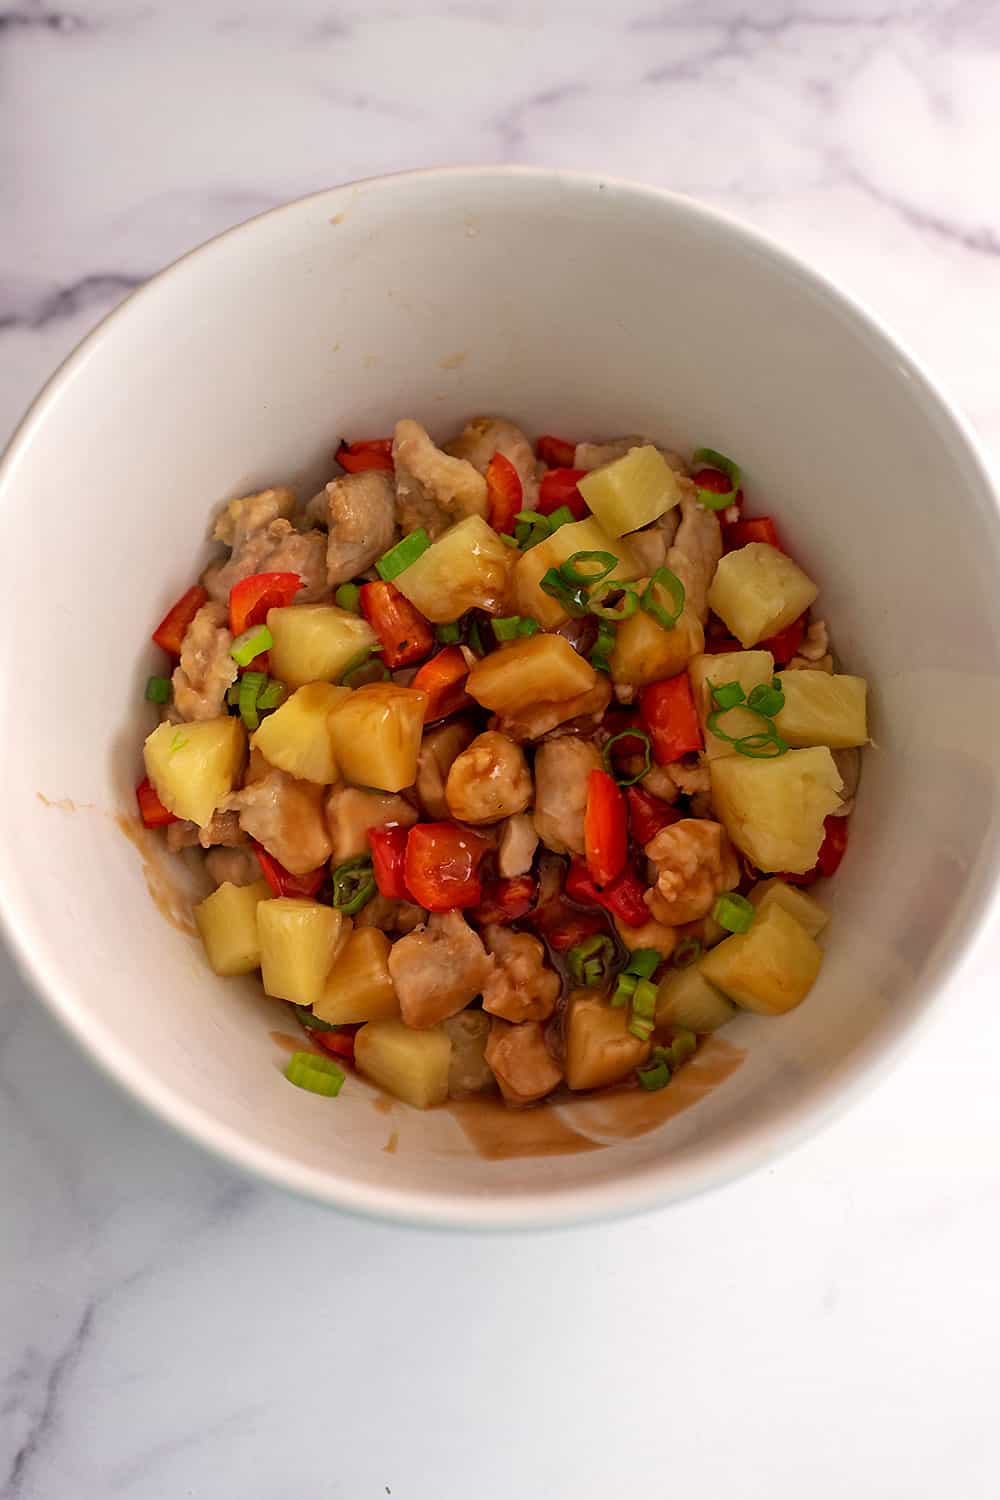 Sweet and sour sauce added to bowl with chicken, pineapple and red bell peppers.